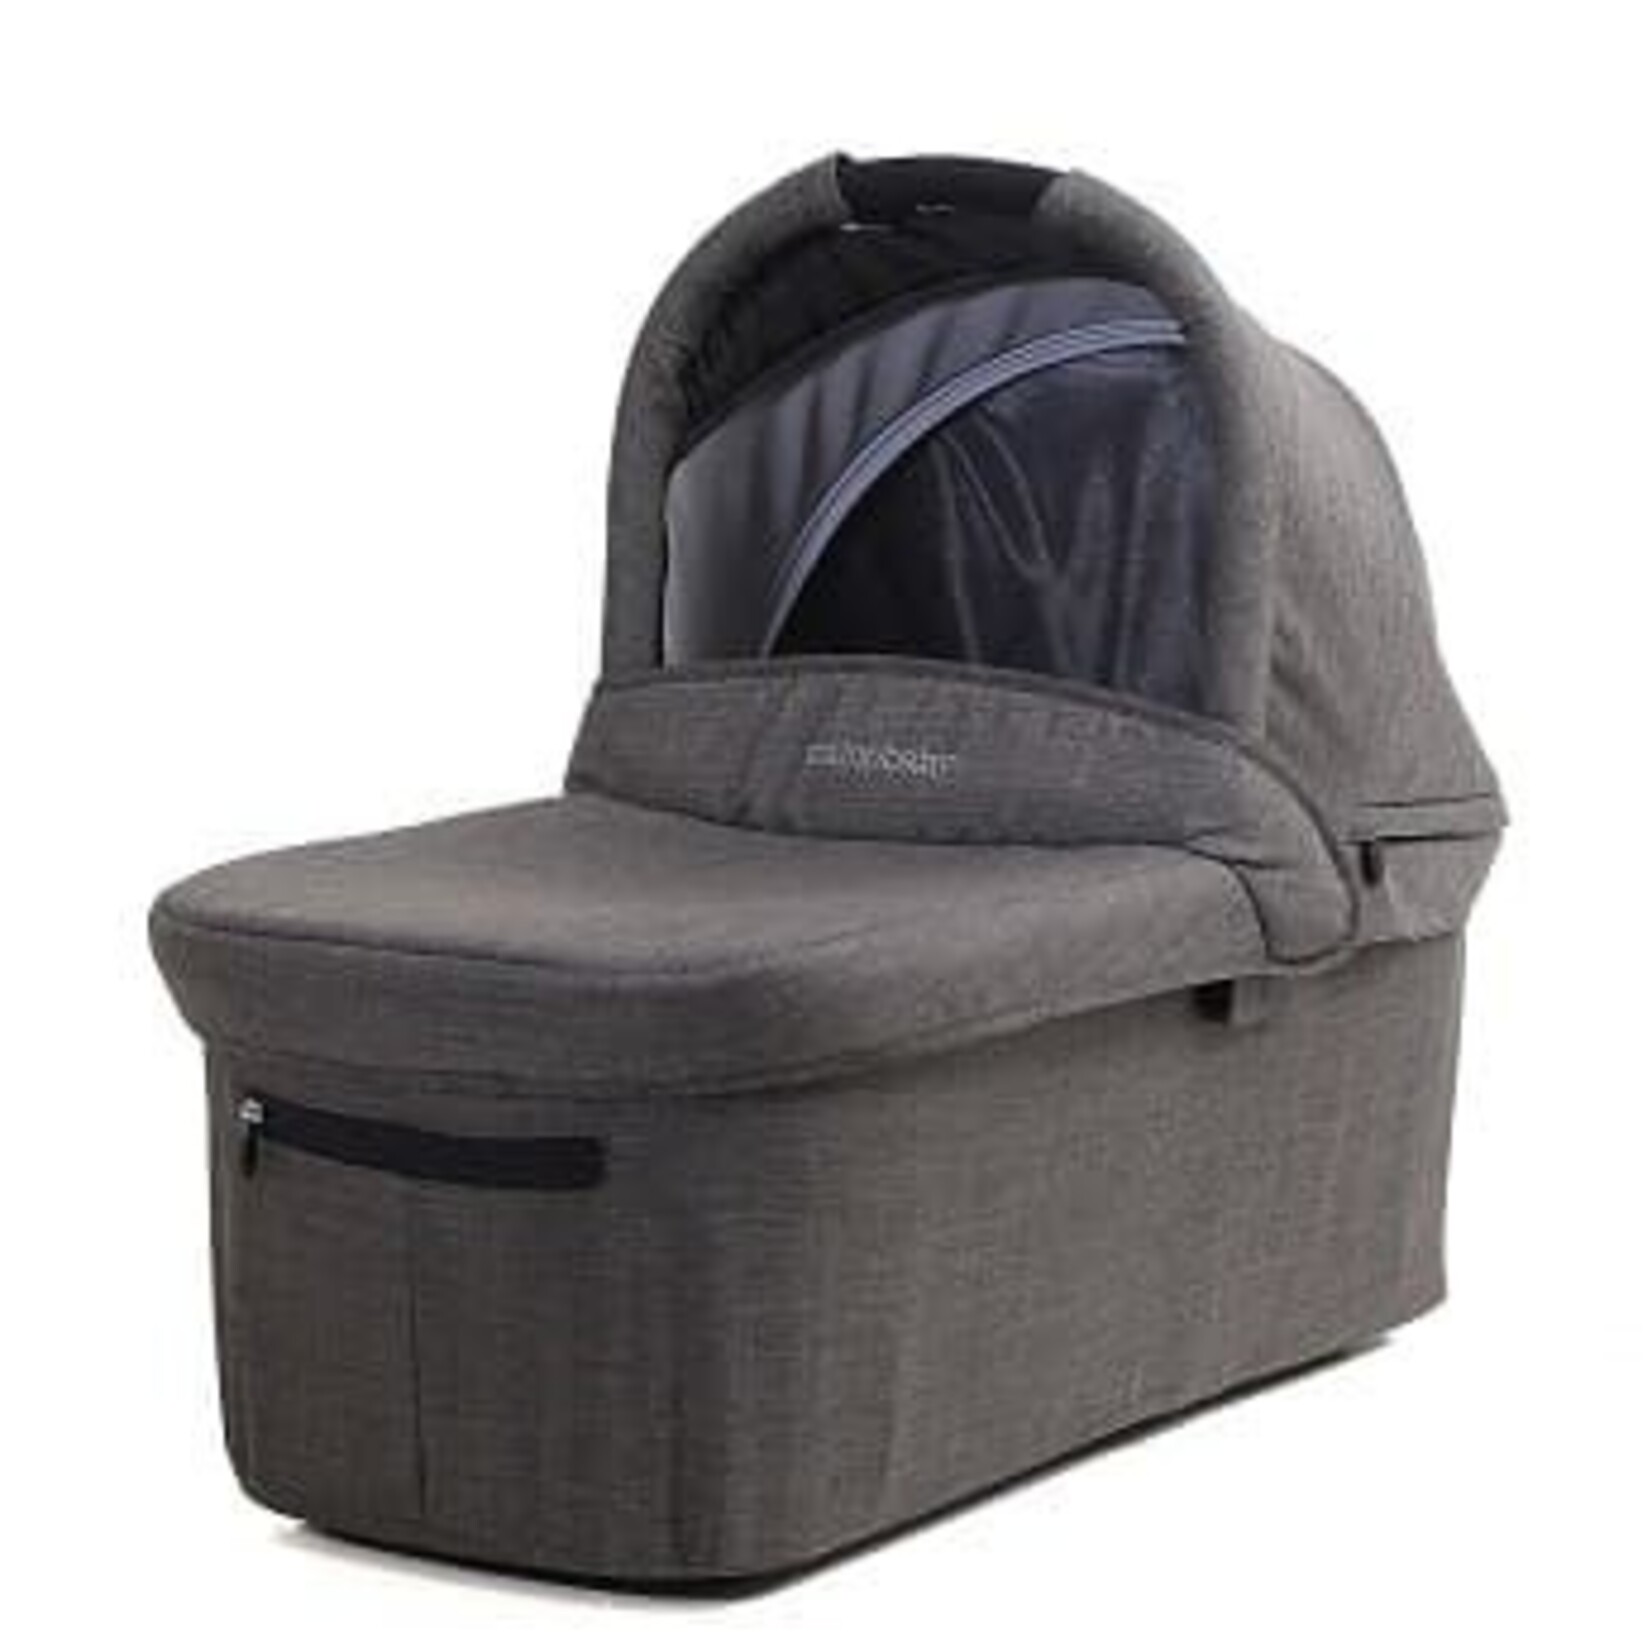 Valco Baby Trend Ultra Bassinet Charcoal(N9827)